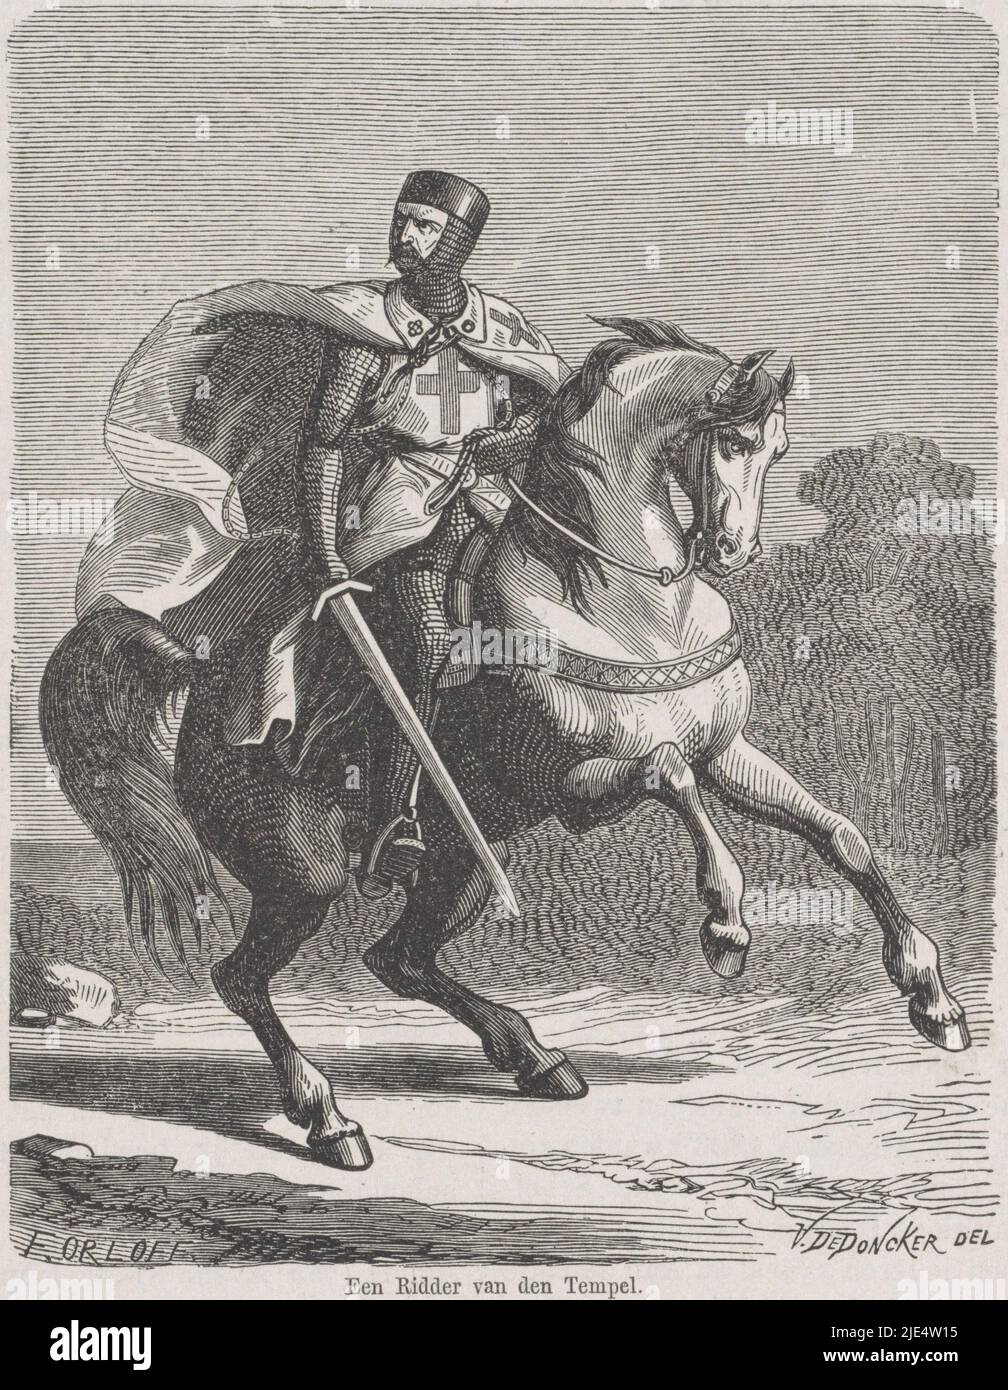 A knight of the Order of the Knights Templar on a rearing horse, A knight of the temple, print maker: Frits Ohrloff, (mentioned on object), Victor De Doncker, (mentioned on object), Amsterdam, 1847 - 1883, paper, letterpress printing, h 130 mm × w 105 mm Stock Photo